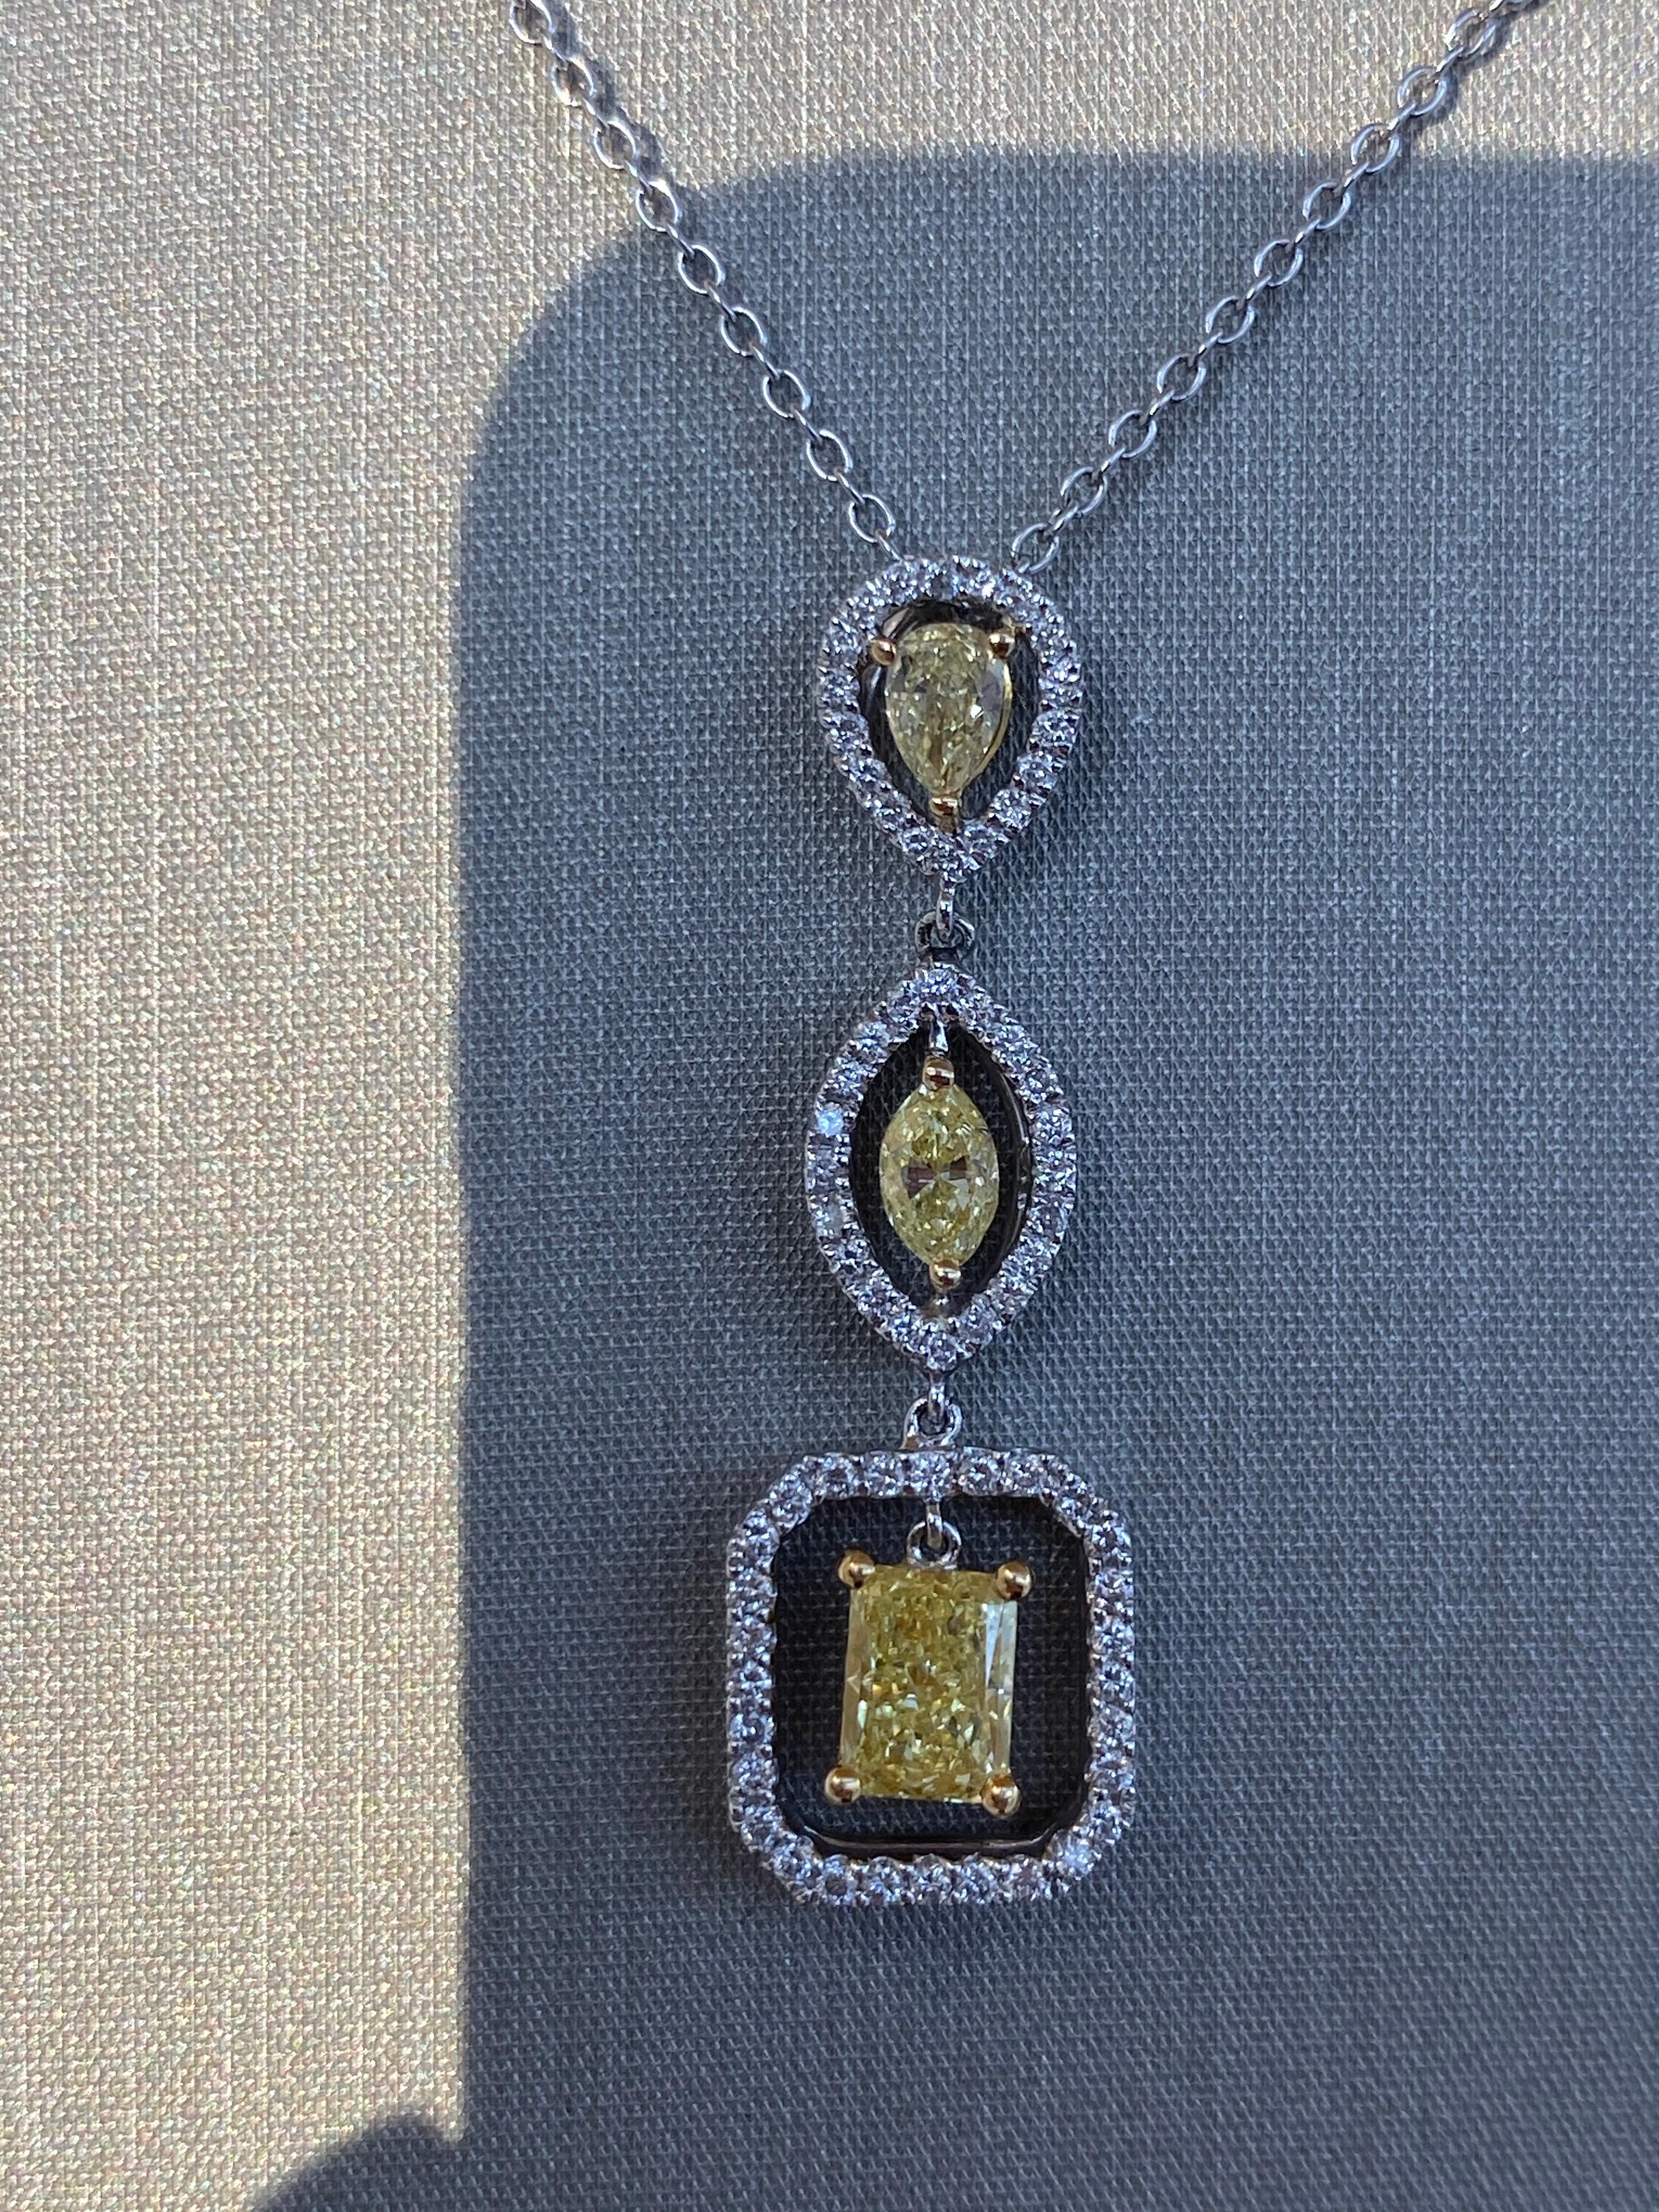 Fancy Yellow Diamond Pendant Necklace.  This beautiful one of a kind drop necklace has three Fancy Yellow Diamonds dangling in-between halos of brilliant round cut white diamonds.  What I love about this pendant is that it is simple enough to be